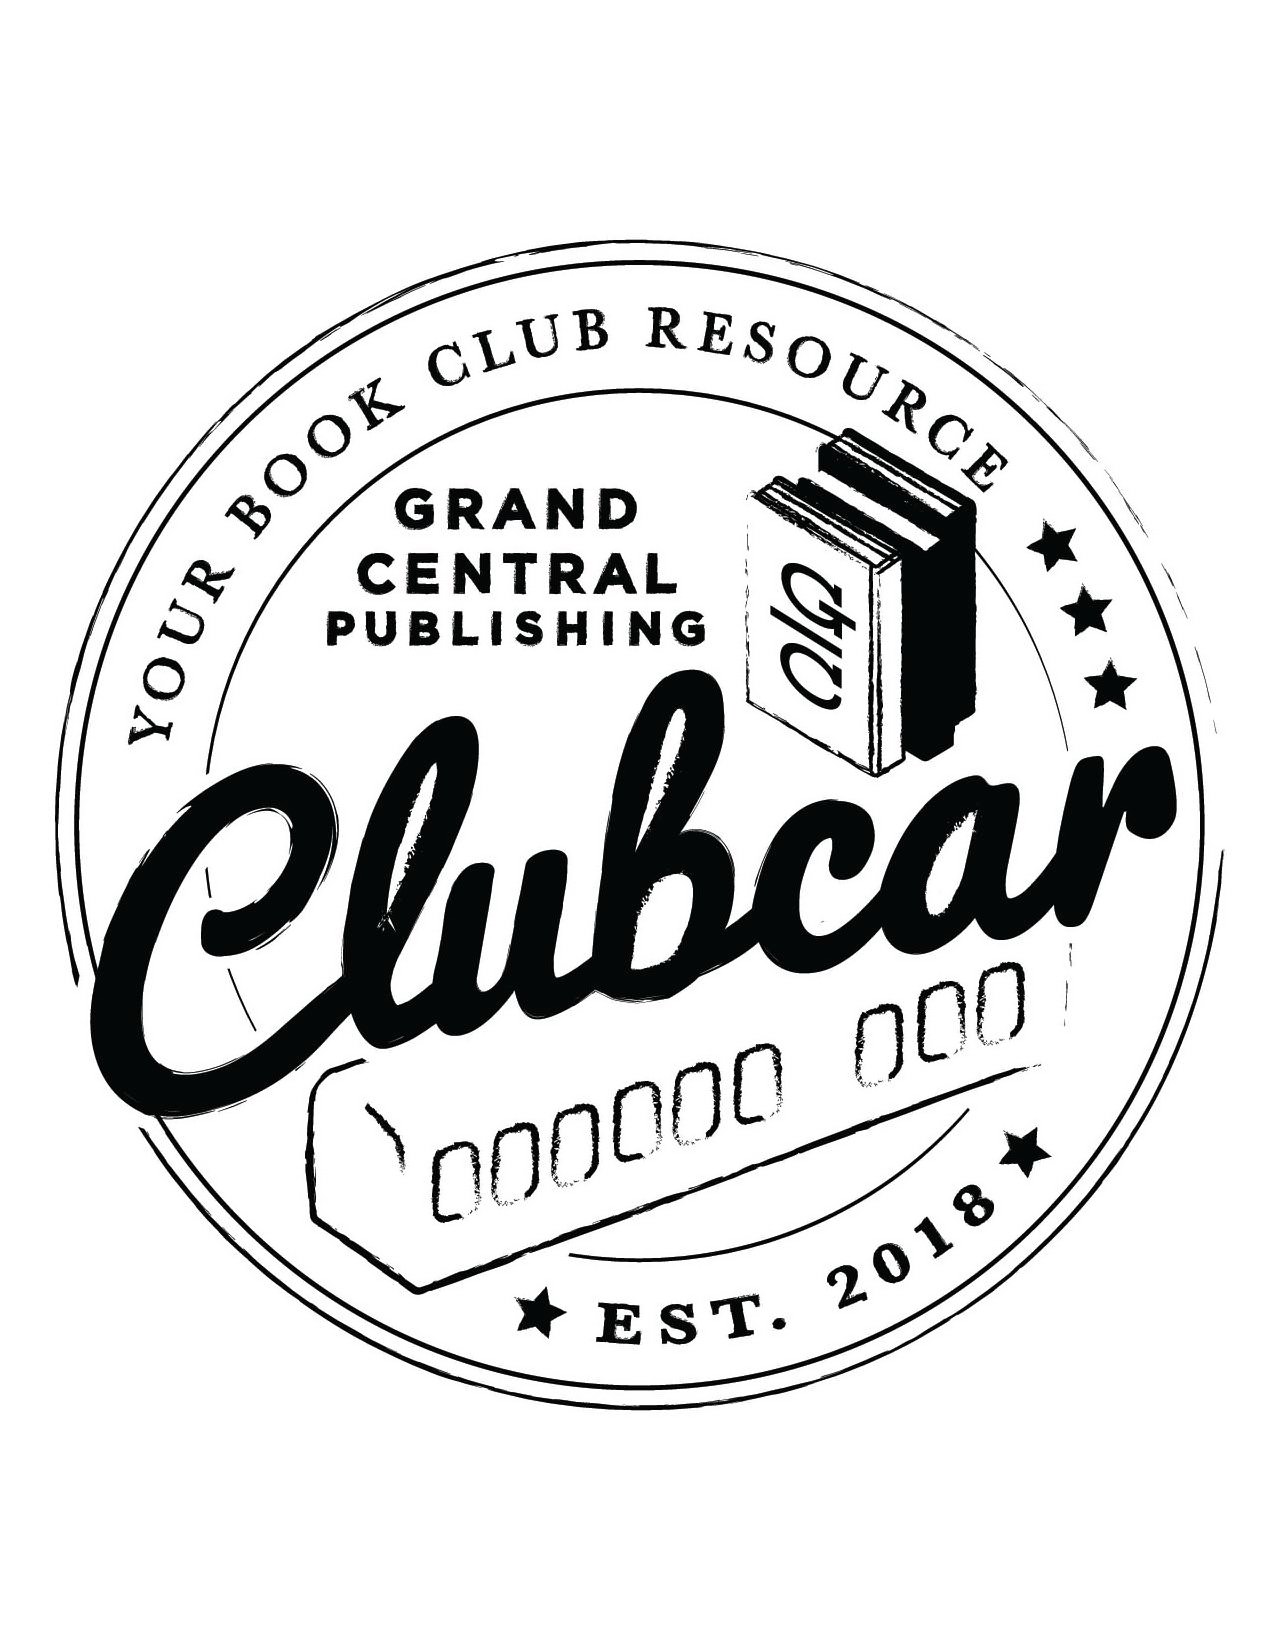  GRAND CENTRAL PUBLISHING CLUBCAR GC YOUR BOOK CLUB RESOURCE EXT. 2018